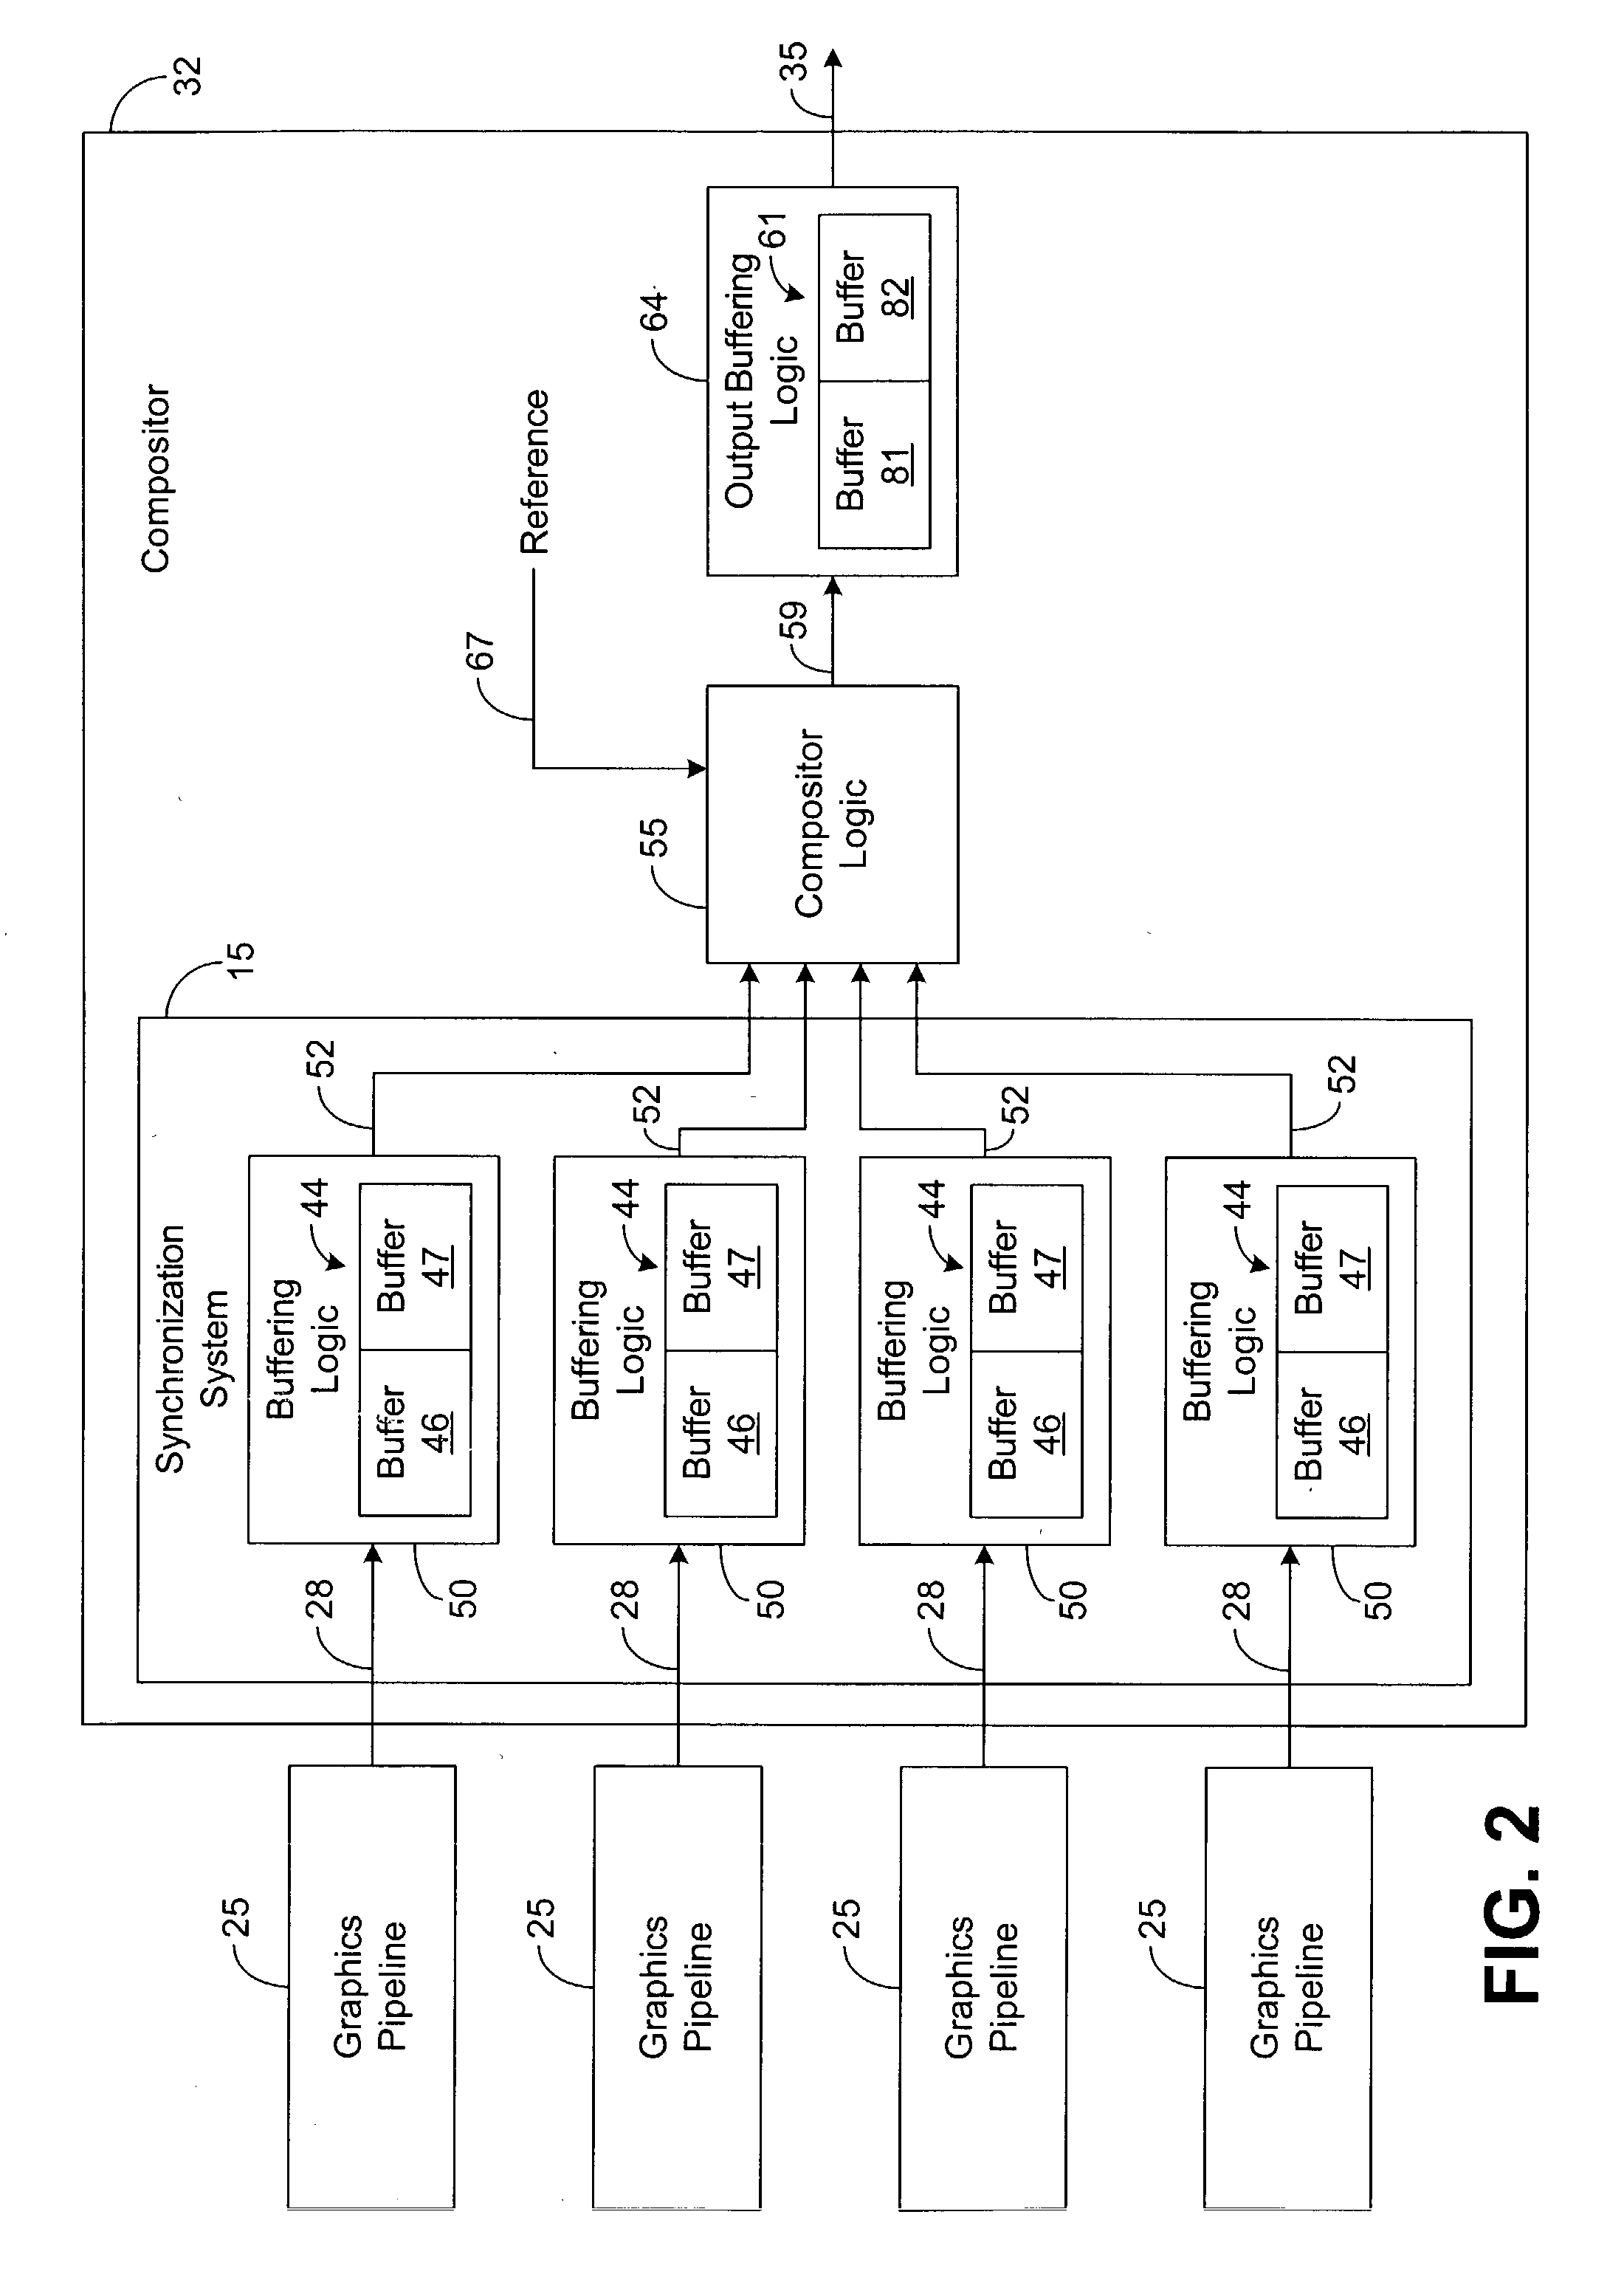 System and method for sychronizing video data streams